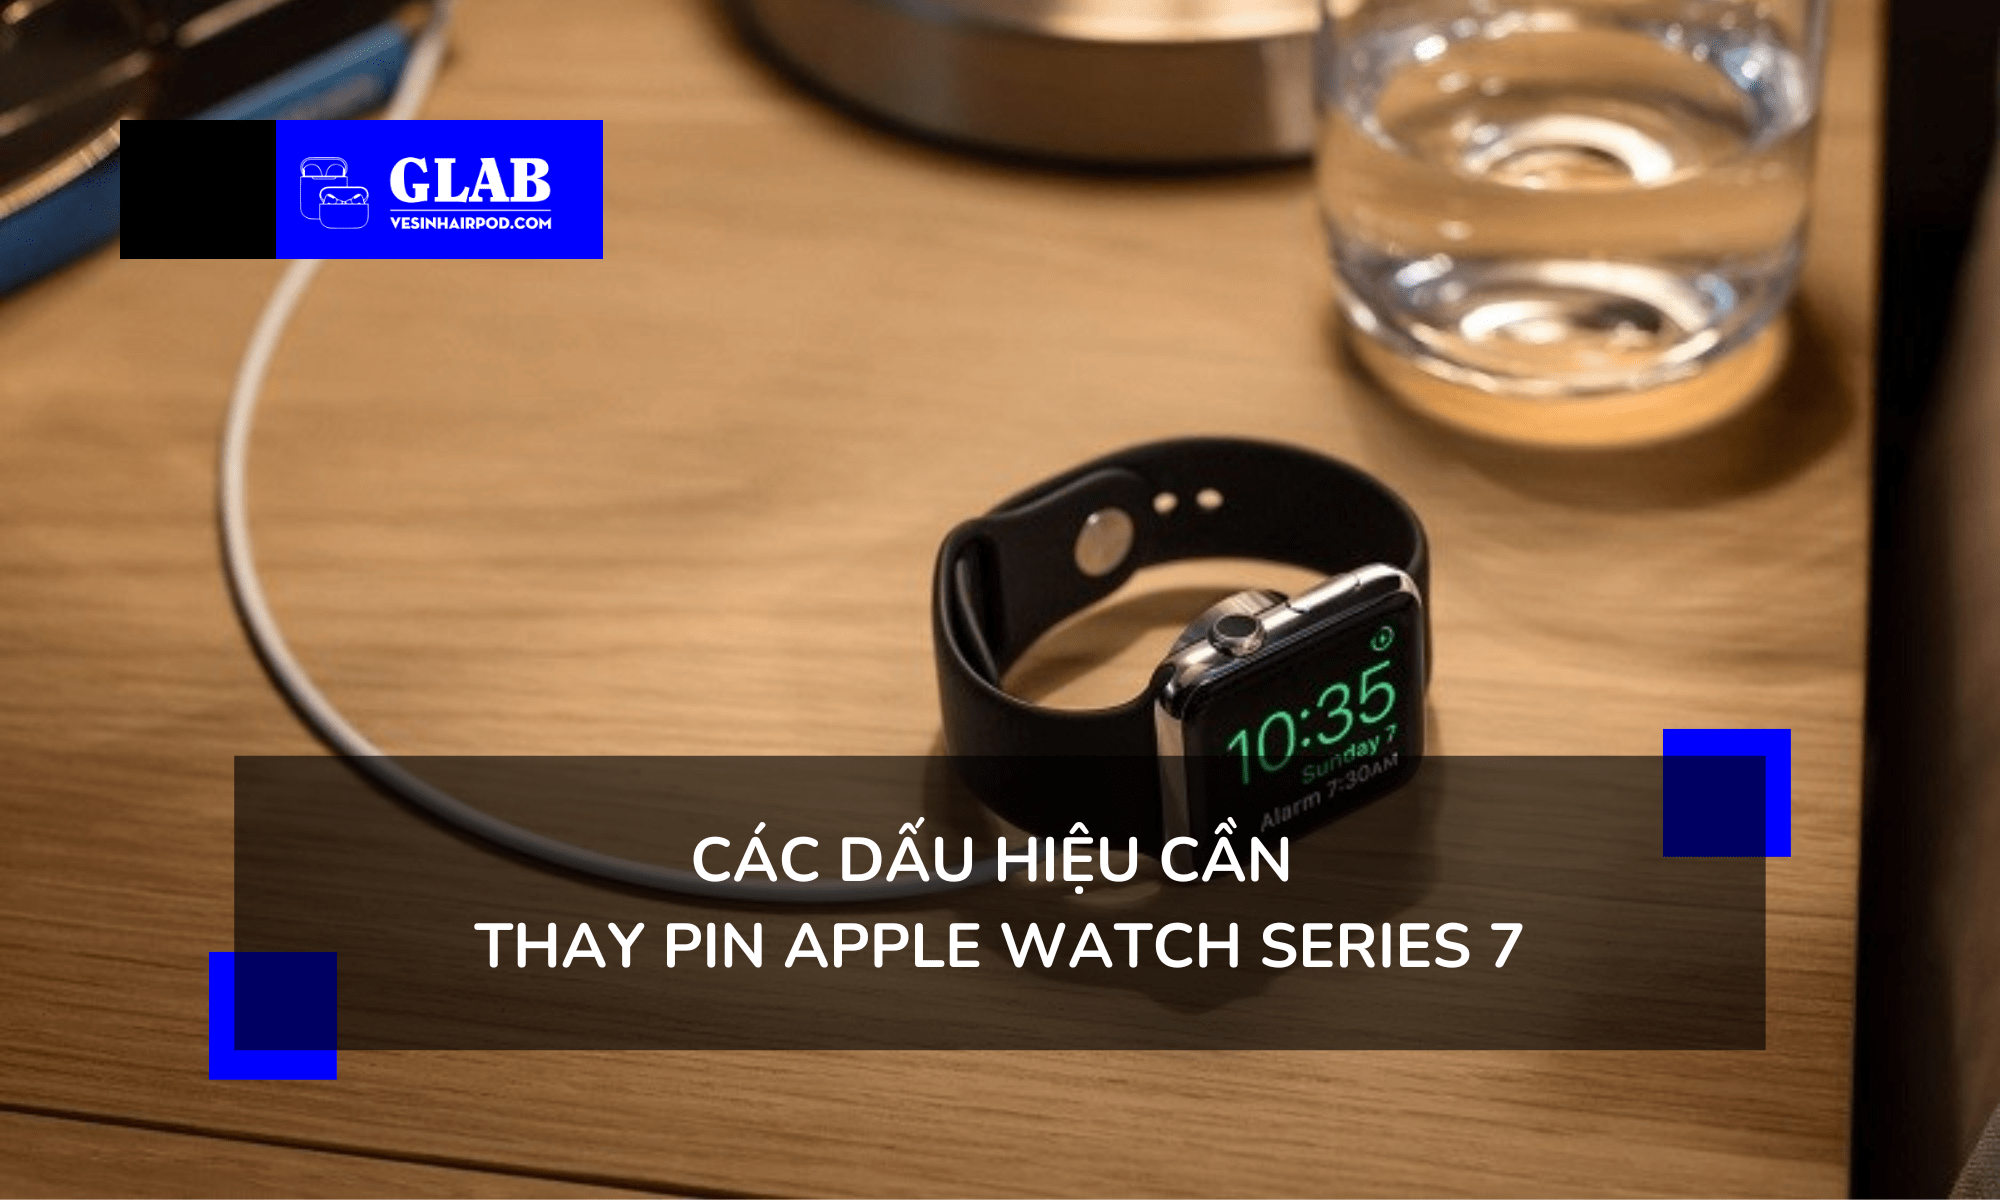 thay-pin-apple-watch-series-7